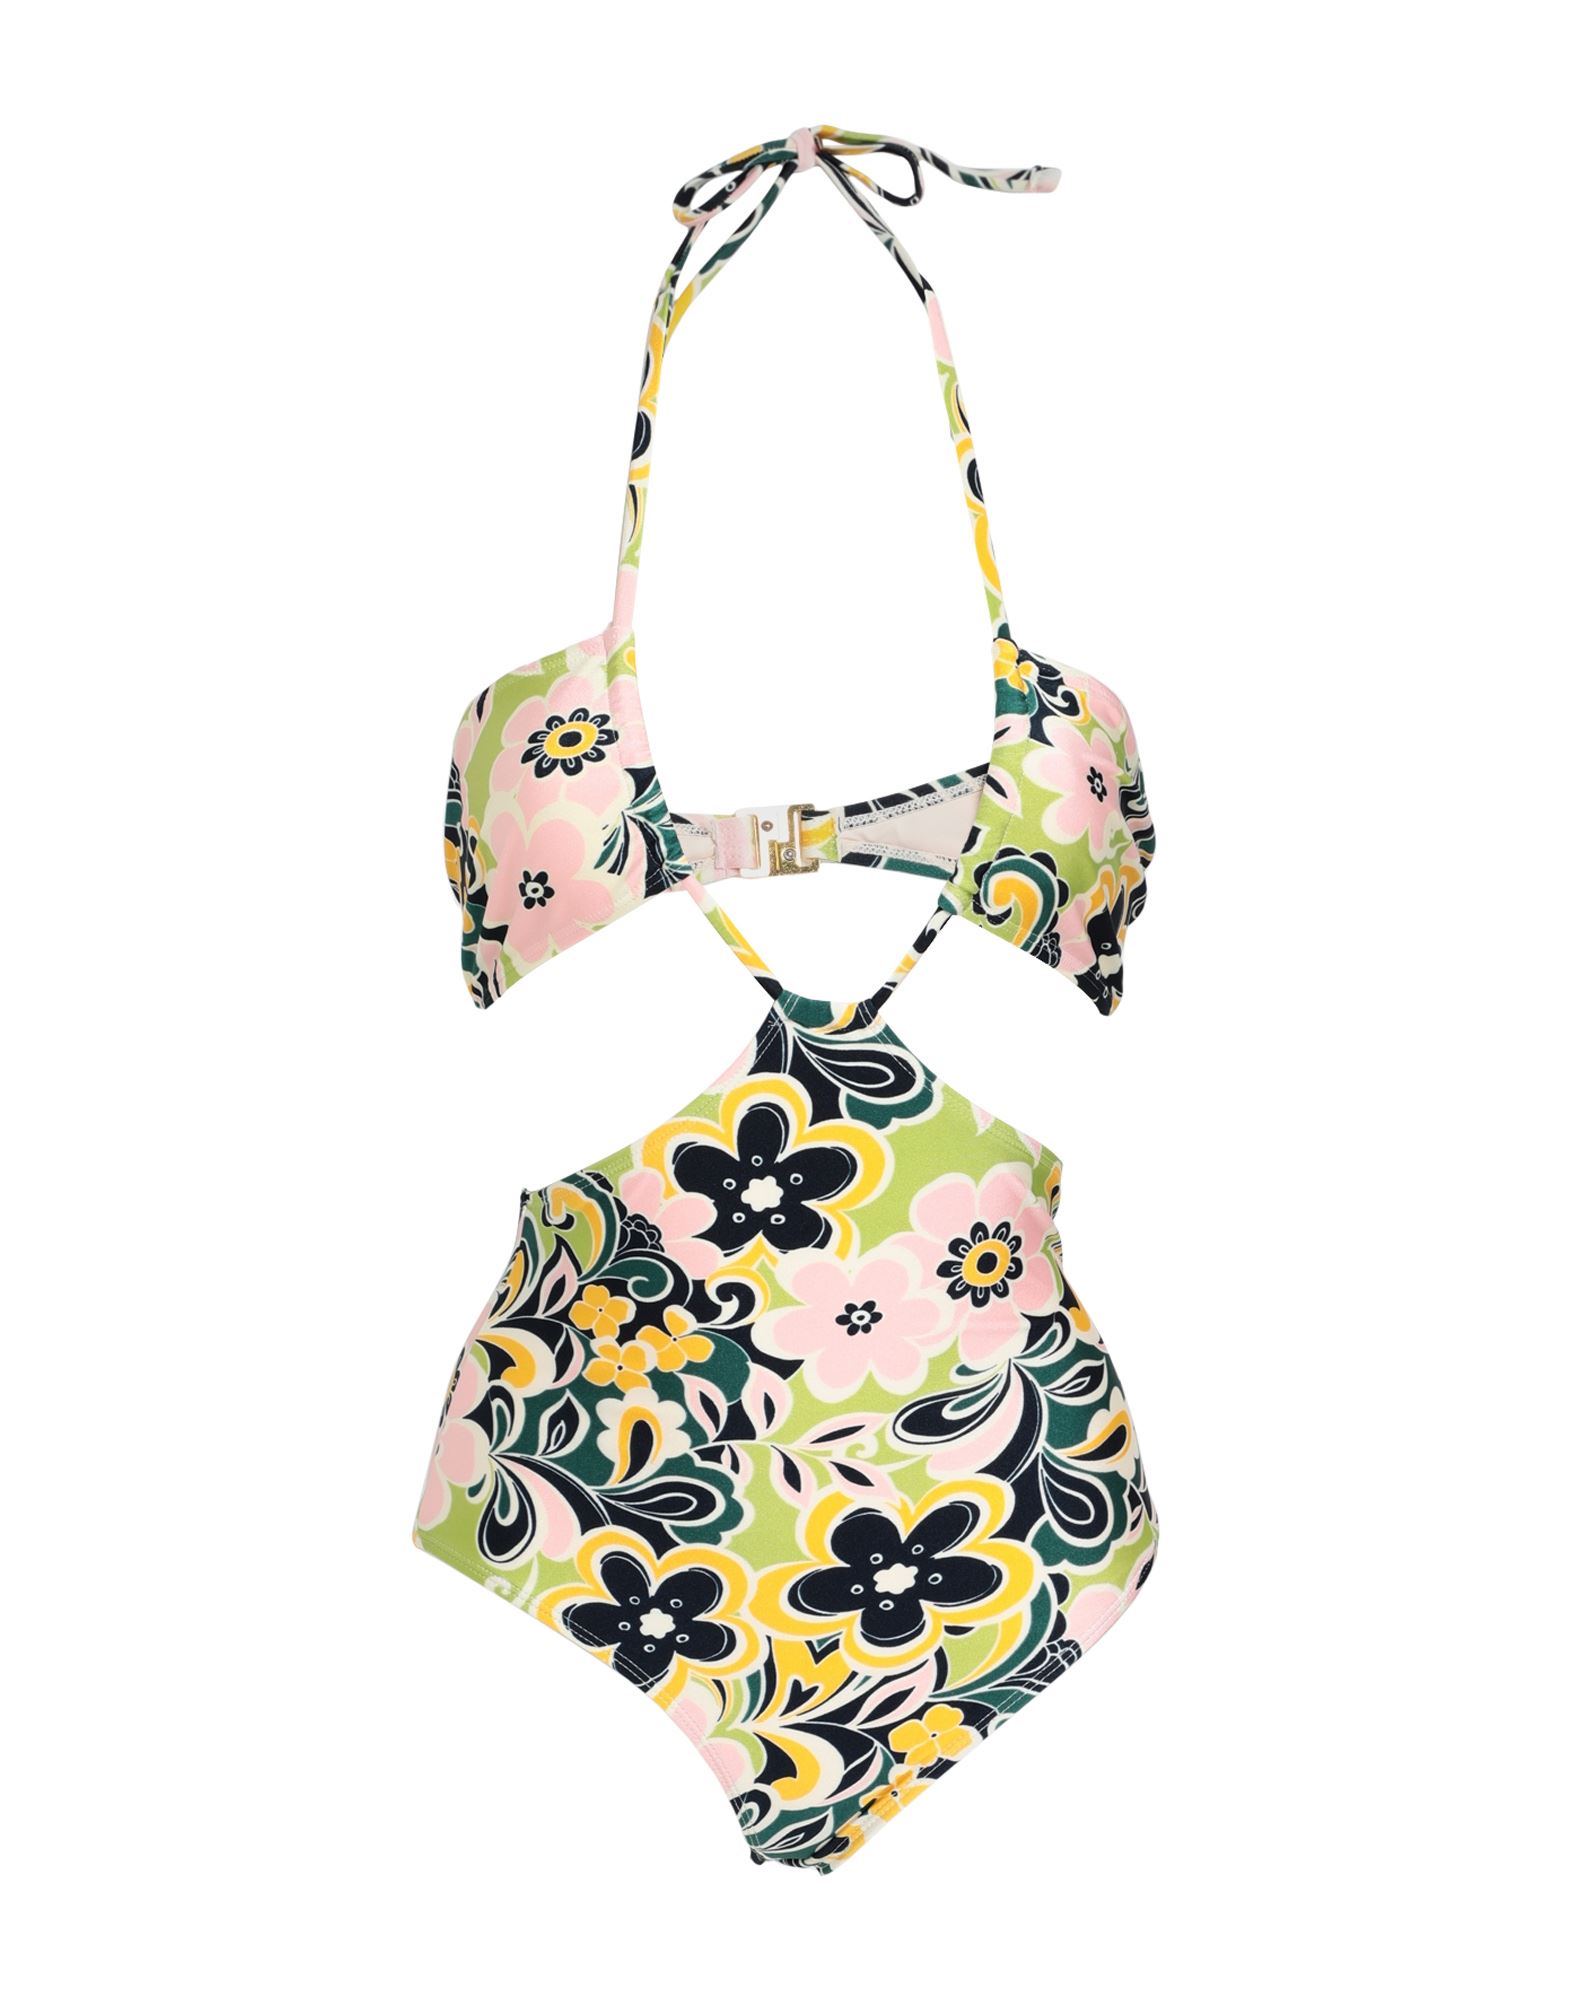 TOPSHOP gbvVbv fB[X is[Xj Topshop 60's floral keyhole cut out swimsuit CgO[